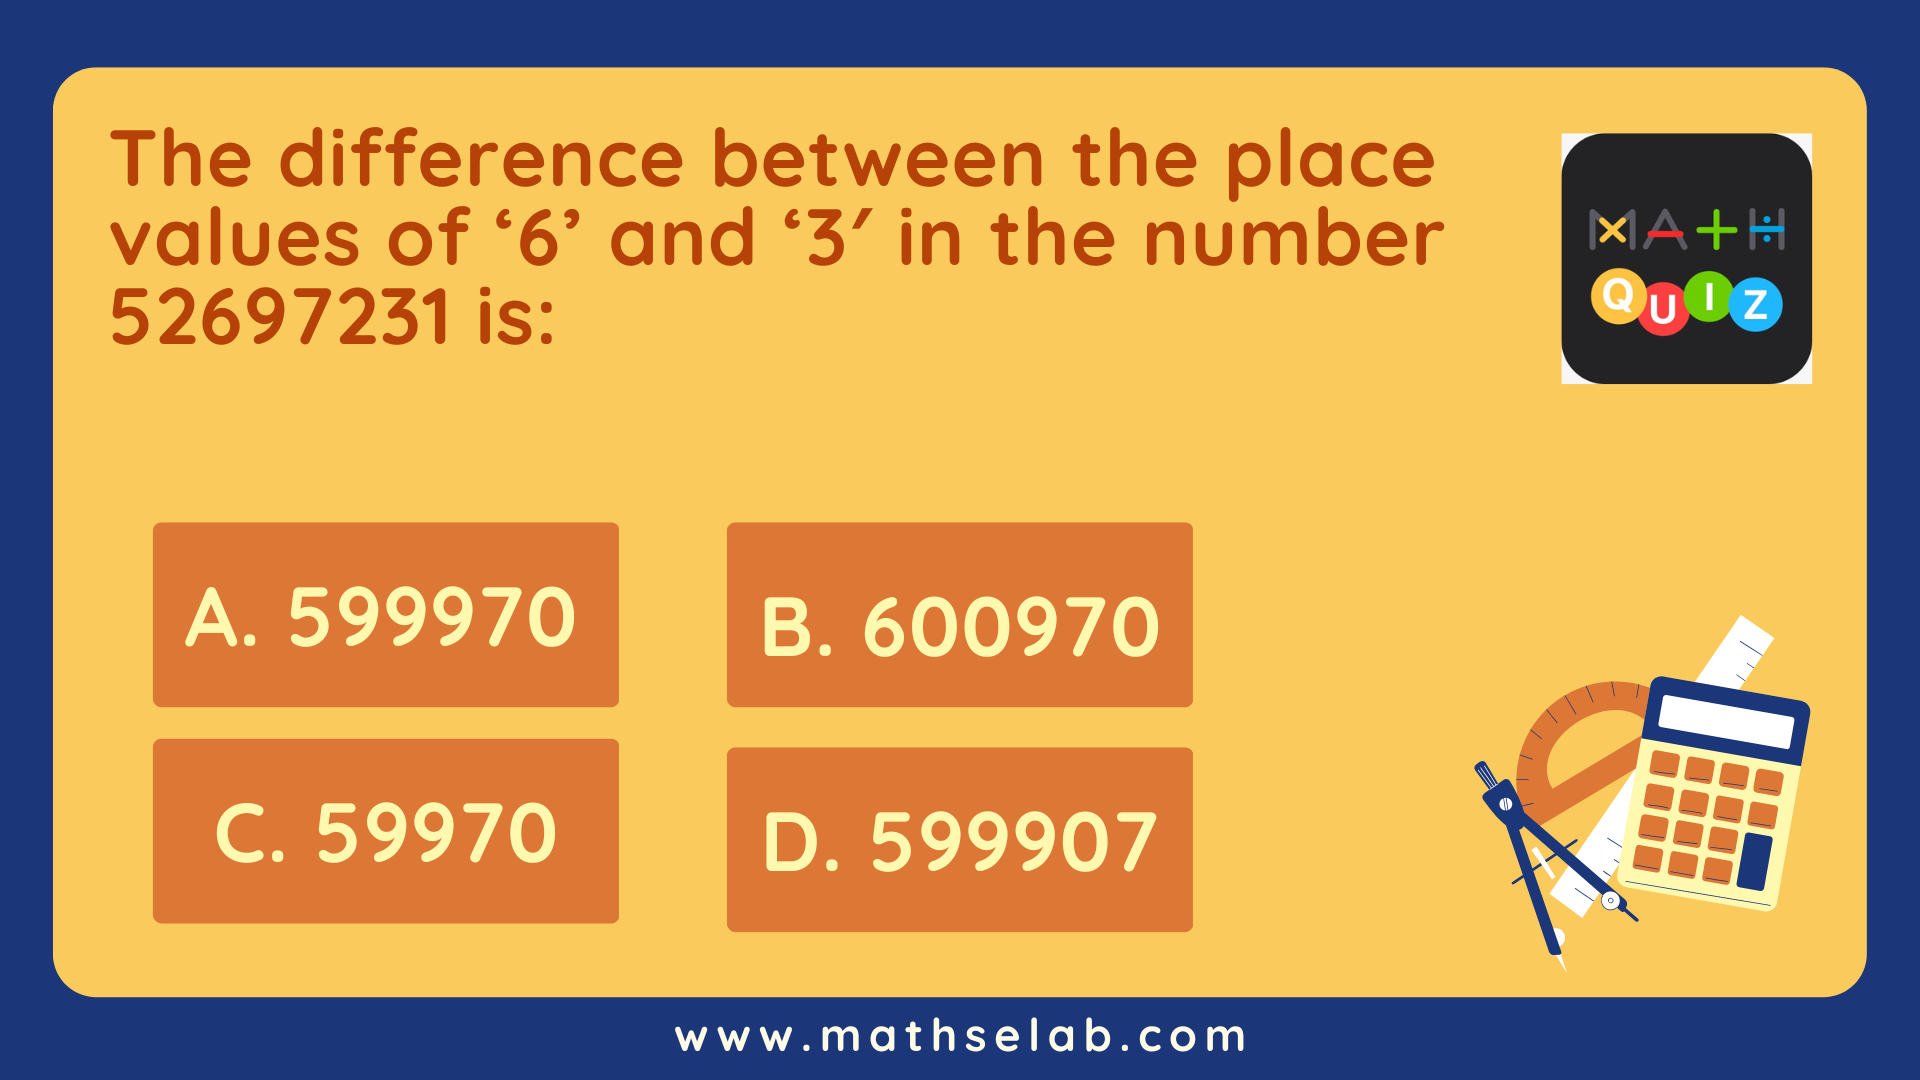 The difference between the place values of ‘6’ and ‘3′ in the number 52697231 is www.mathselab.com